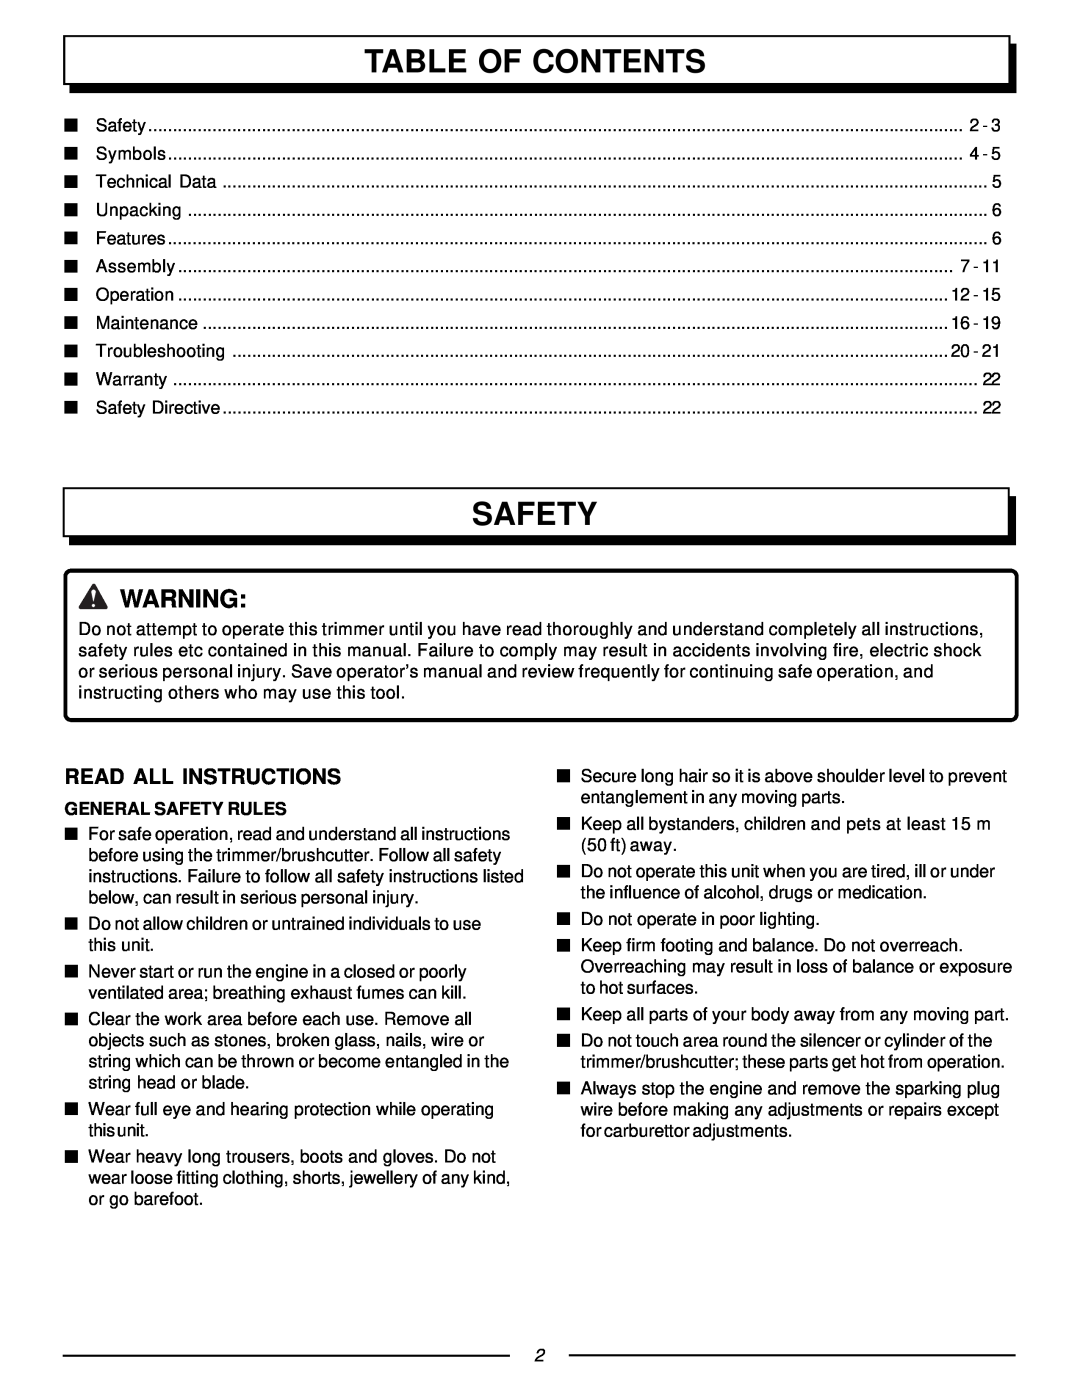 Homelite UT70127 manual Table Of Contents, Read All Instructions, General Safety Rules 